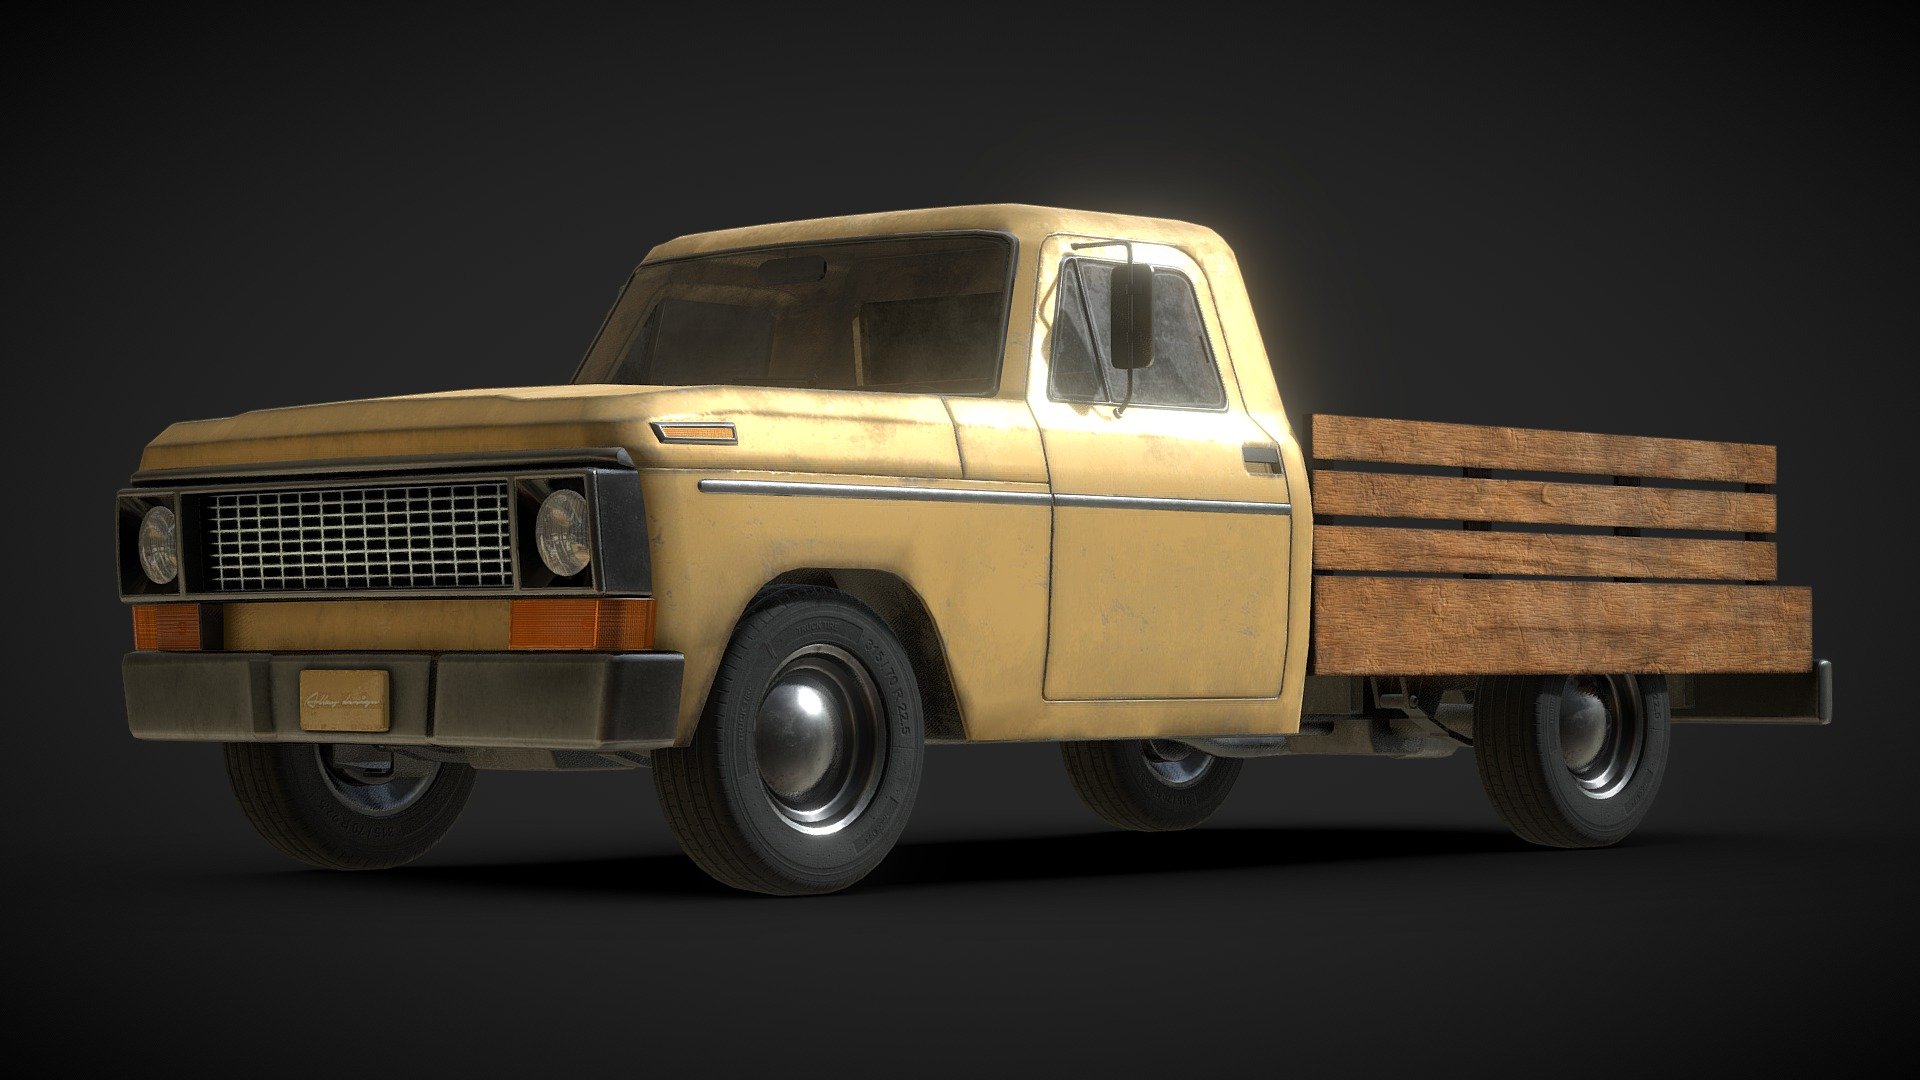 Pickup Truck - Mid Poly - Interior included
Game Ready / Unreal Engine / Unity - Directly import with texture maps and start using.
Contact me if you want the non triangulated version of this model - dsaalister@gmail.com - Pickup Truck - Buy Royalty Free 3D model by Allay Design (@Alister.Dsa) 3d model